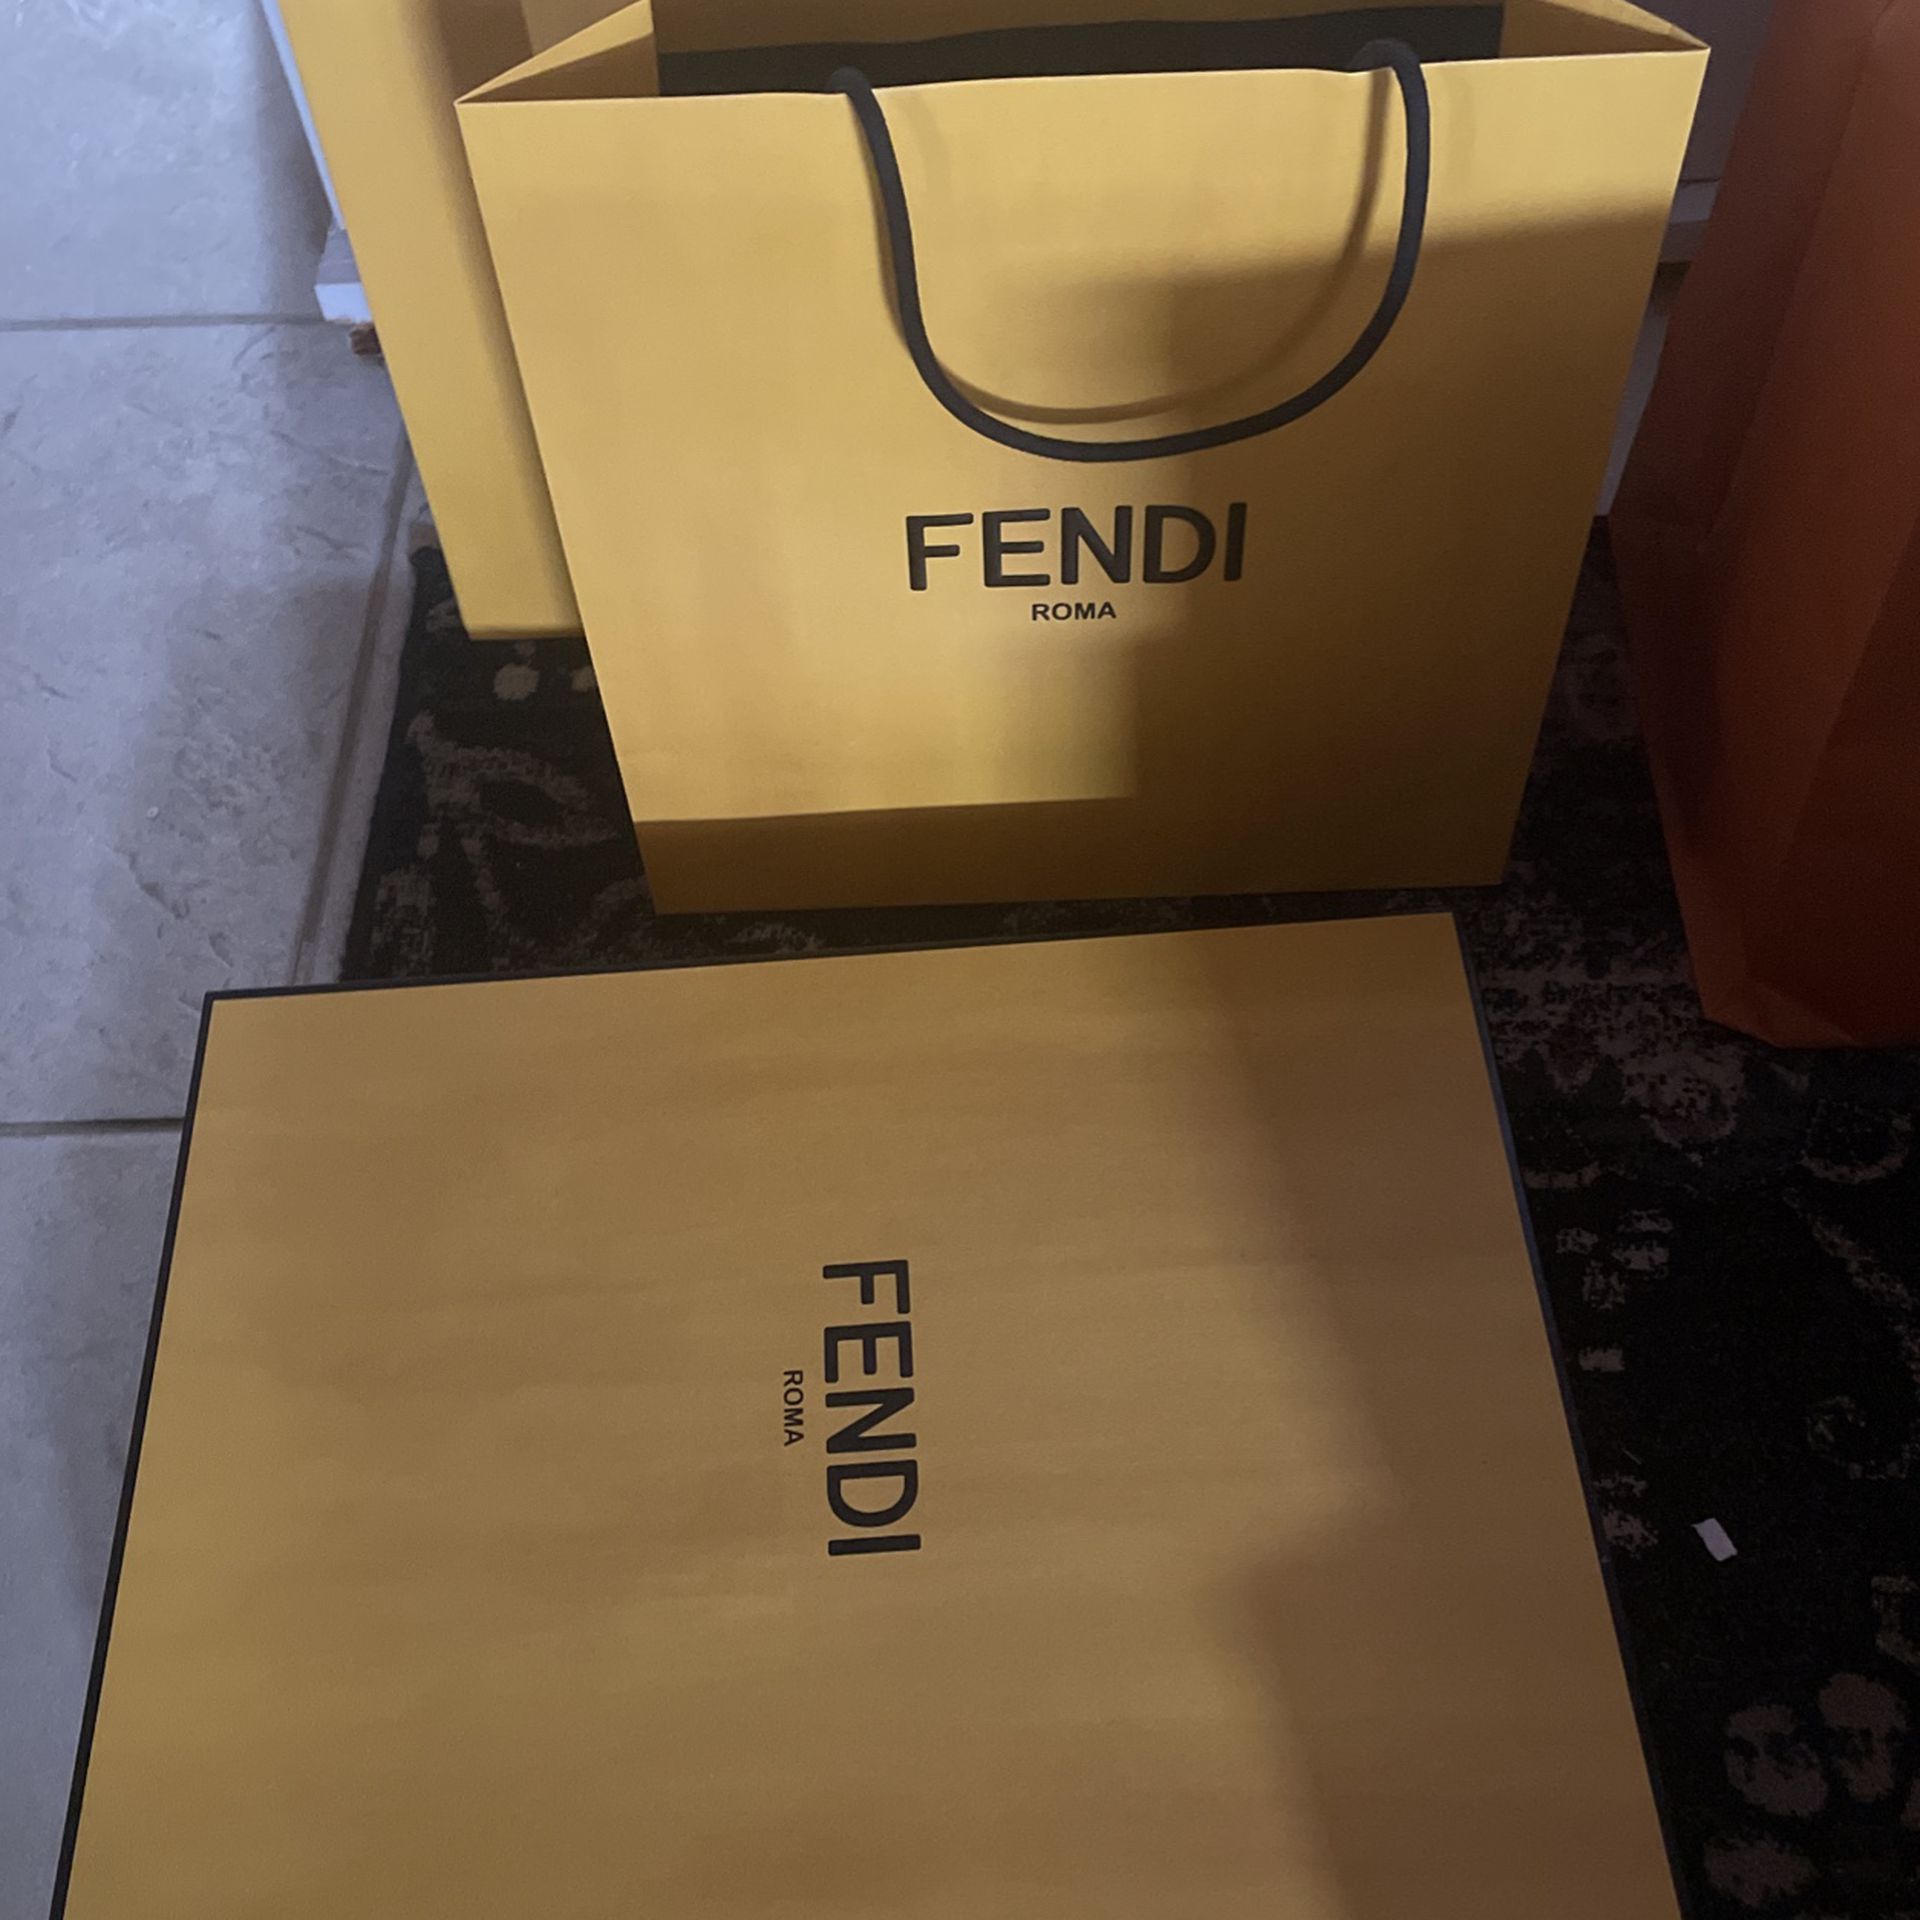 Fendi Bags And Boxes 